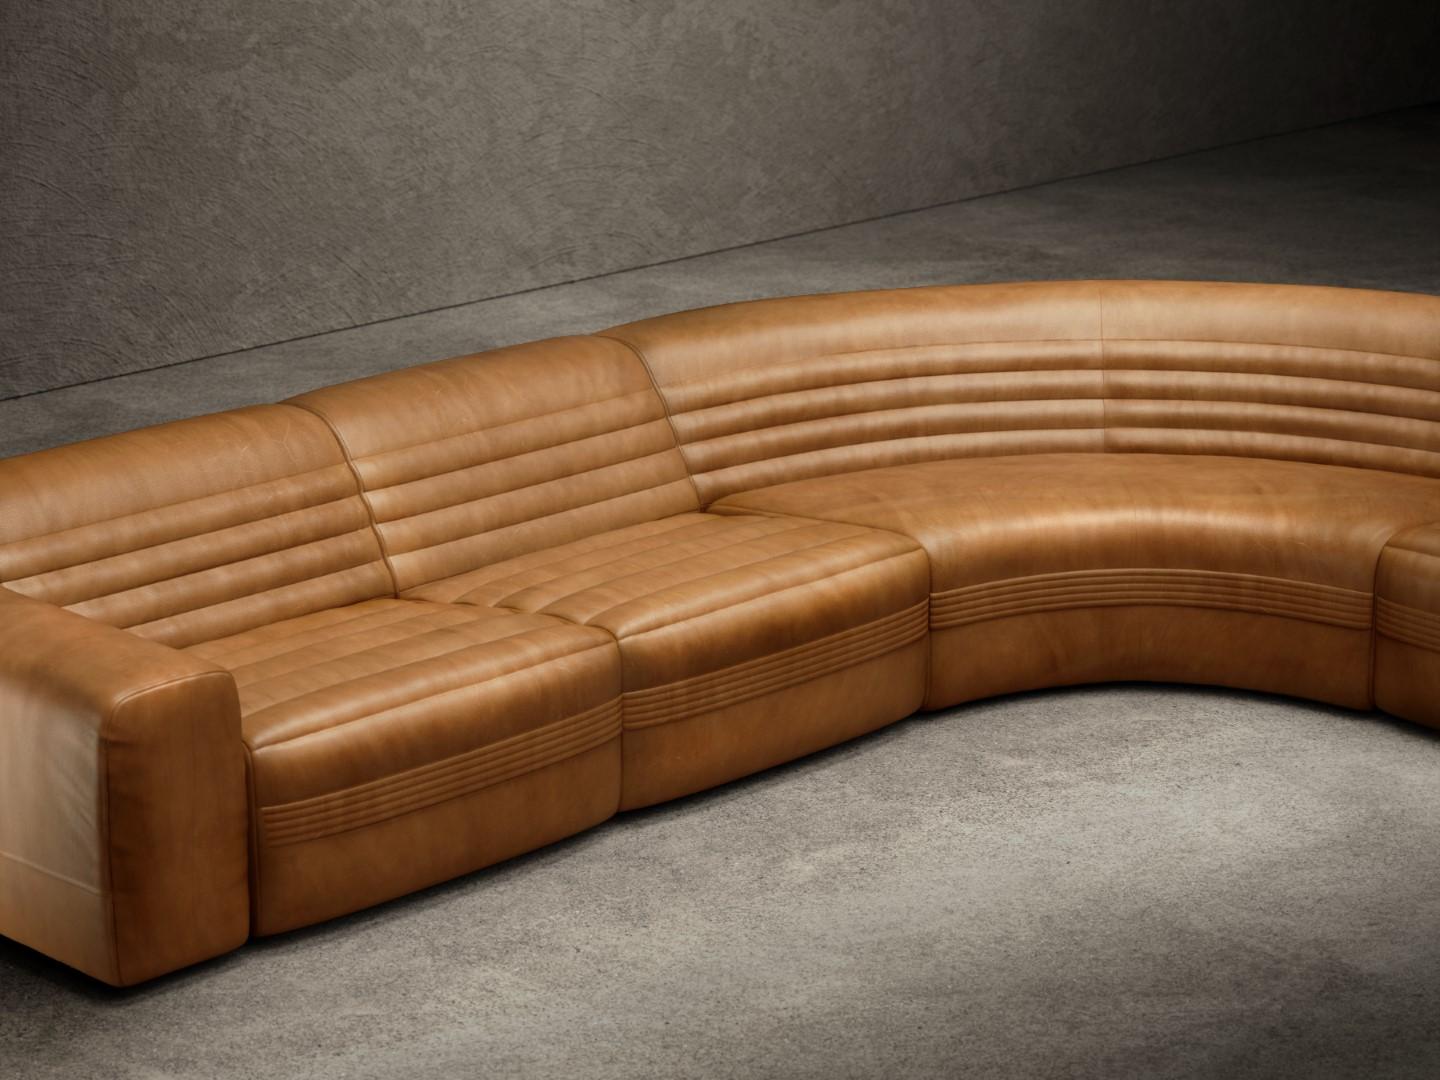 Modern Vicious Modular Sofa Touch Leather Sella color For Sale